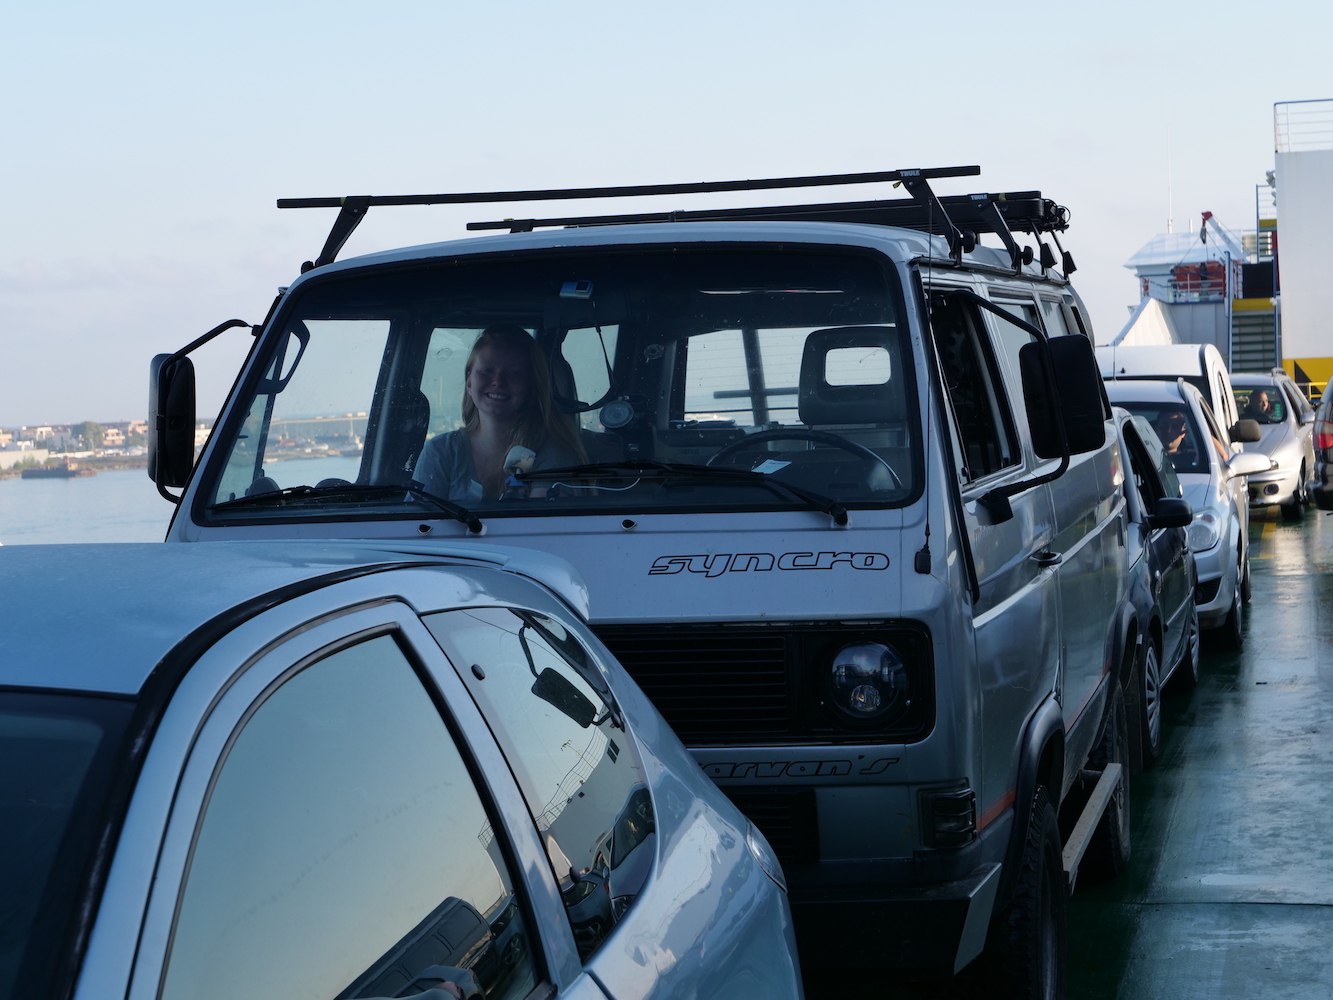  The van packed in on the top deck of the ferry. 